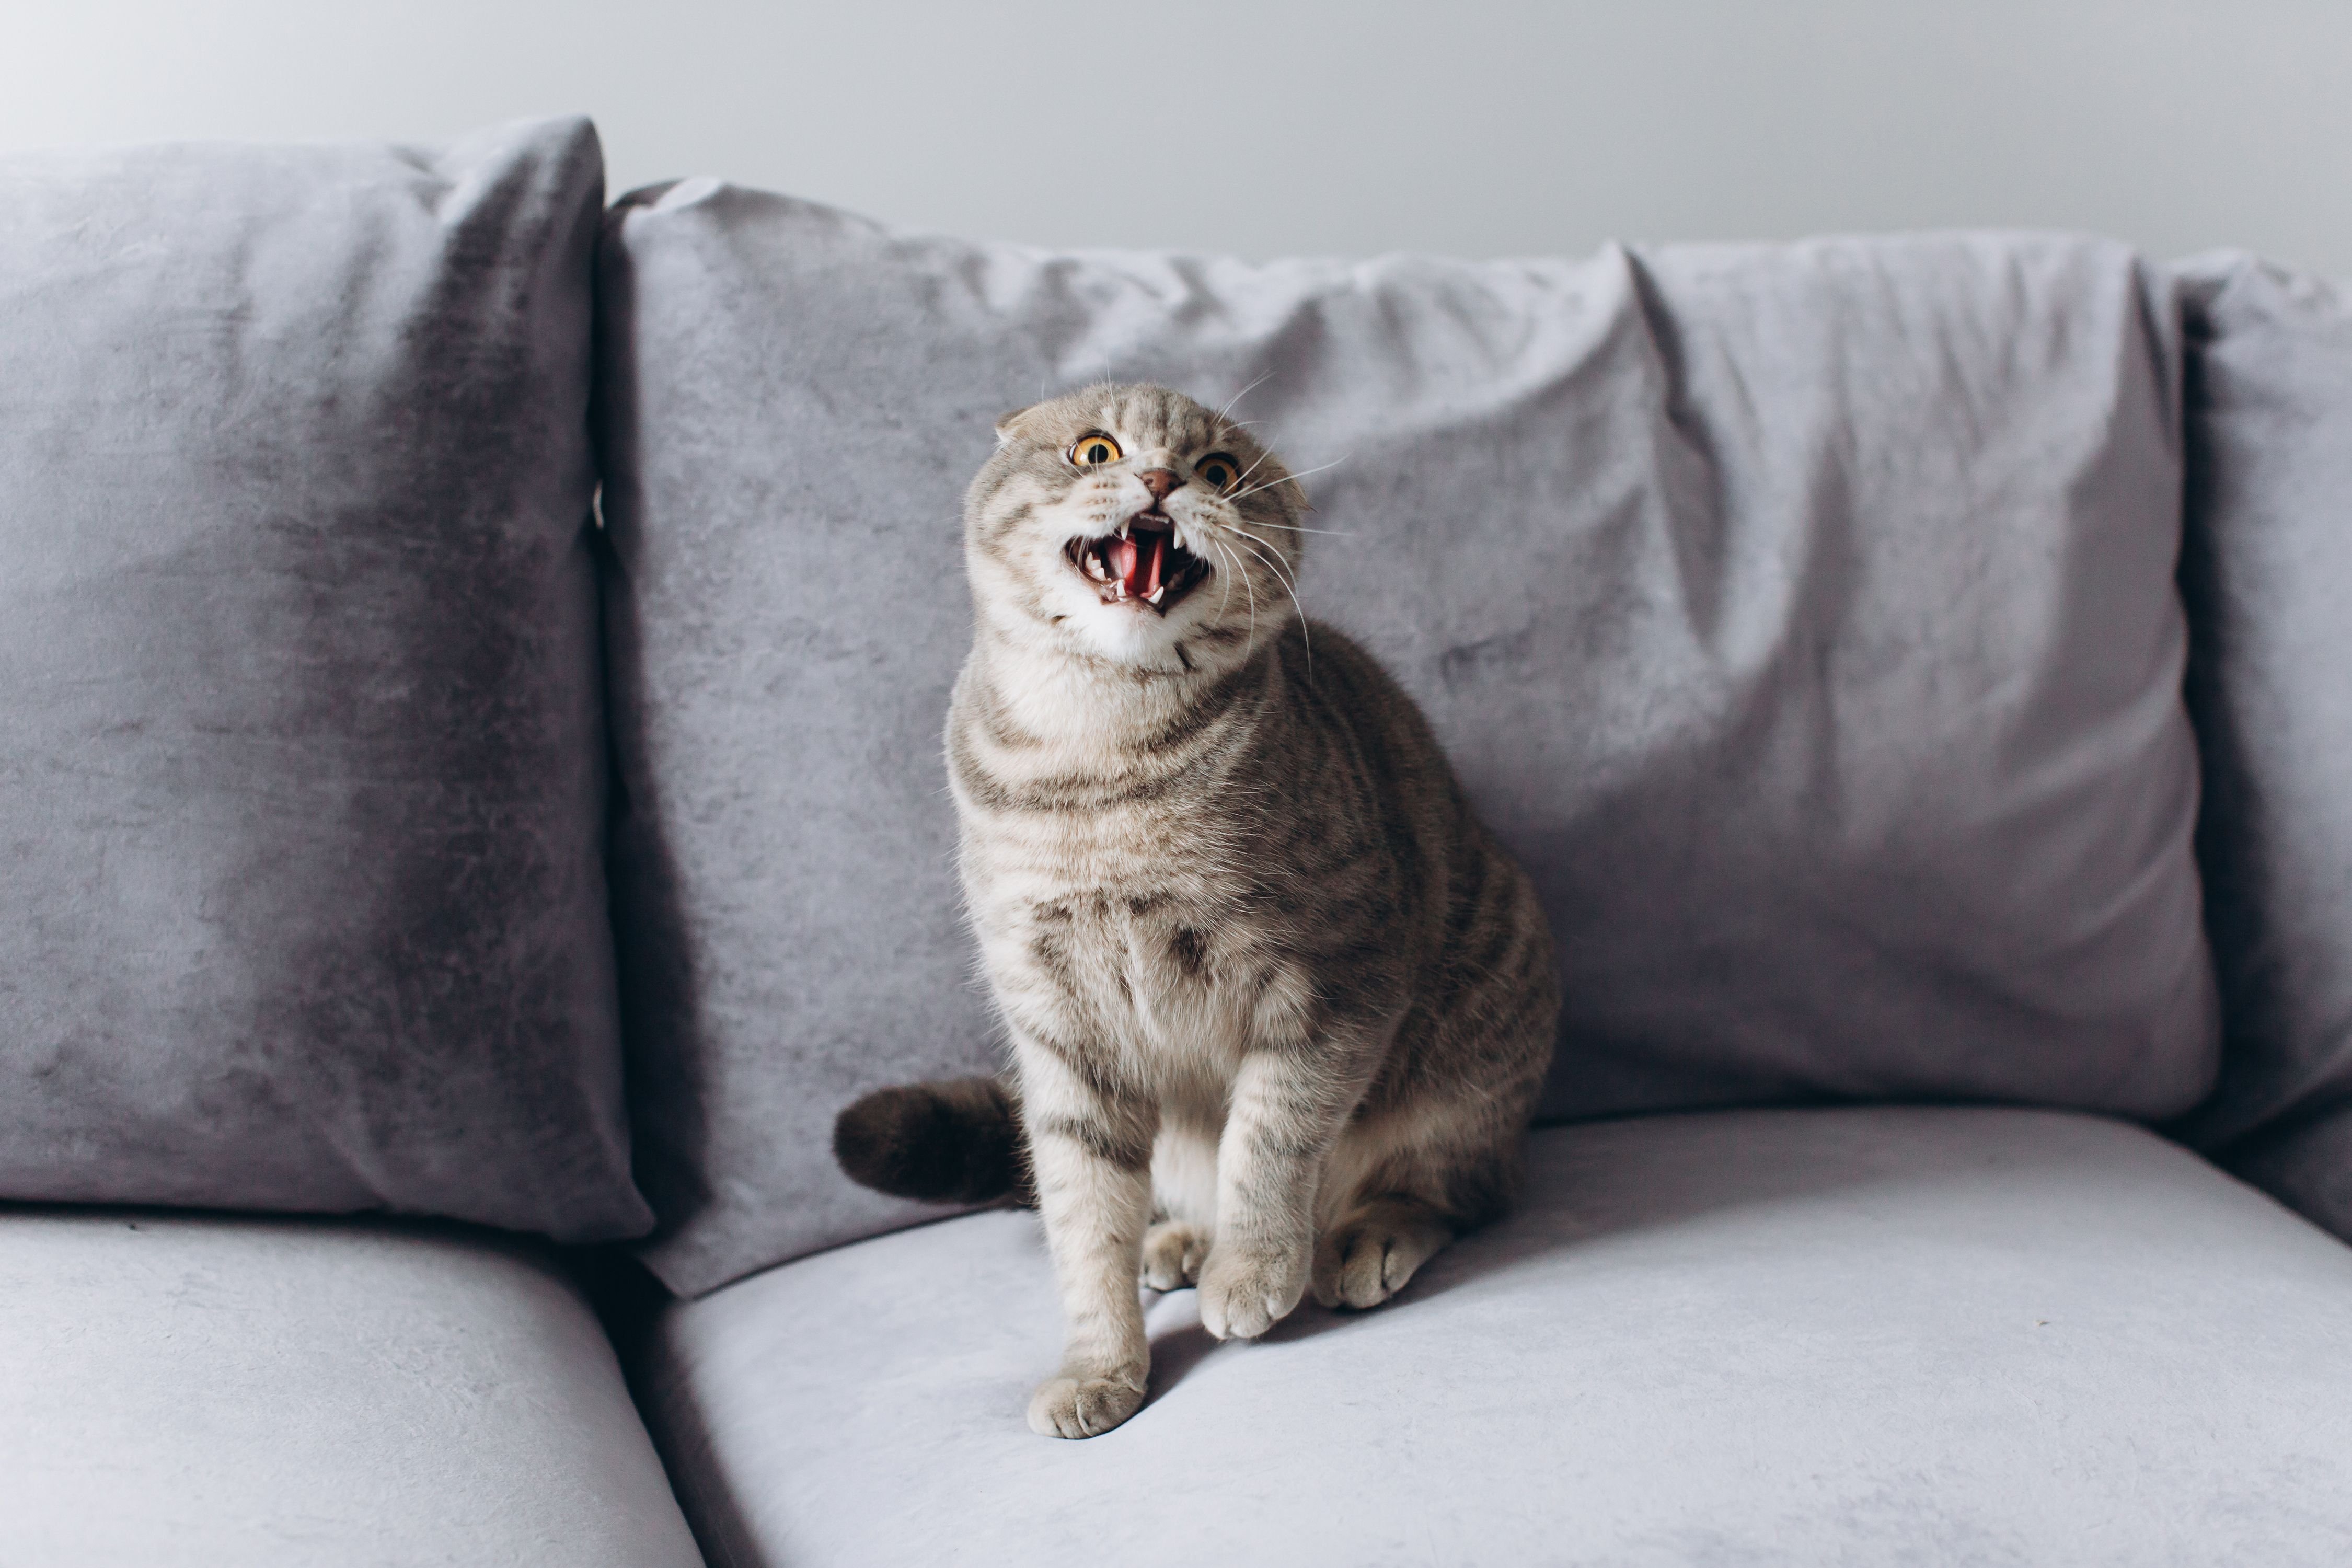 Cat hissing on couch.| Photo: Shutterstock